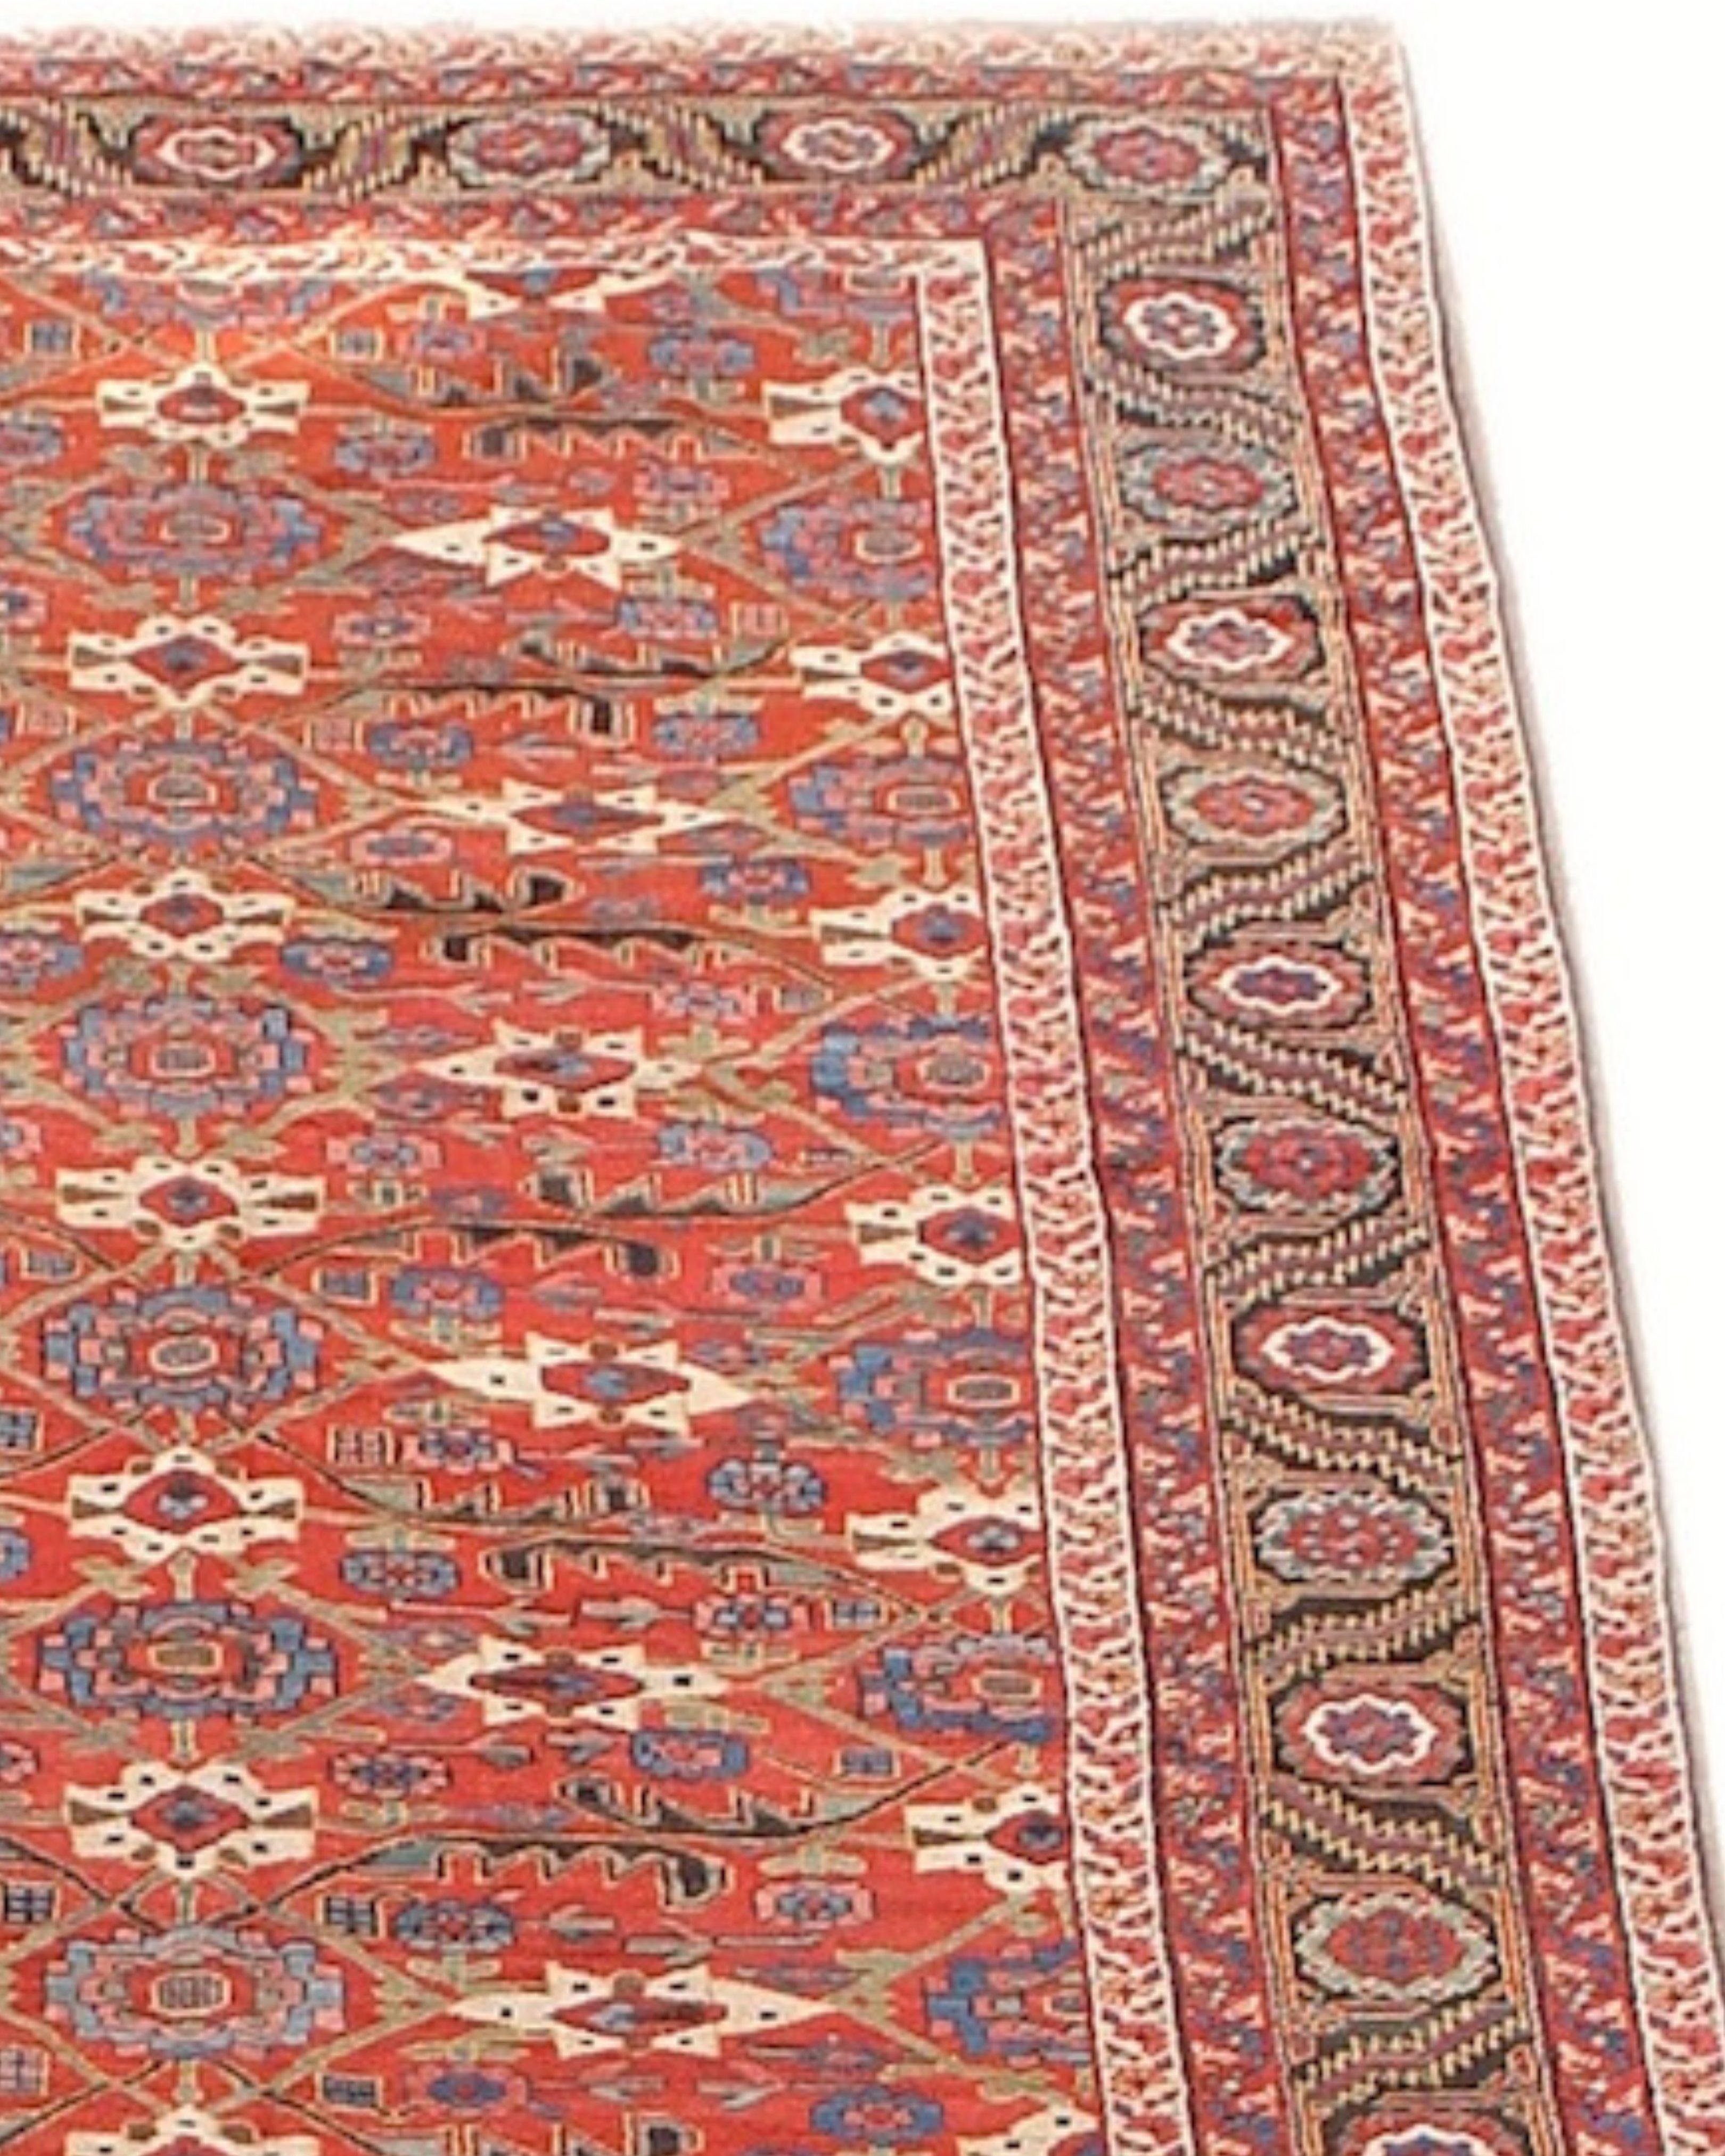 Antique Northwest Persian Rug, 19th Century

This elegant Northwest Persian corridor carpet draws an all over design of rotating blossoms and foliage against a madder red ground. Centered around sky blue rosettes drawn within diamonds, a network of